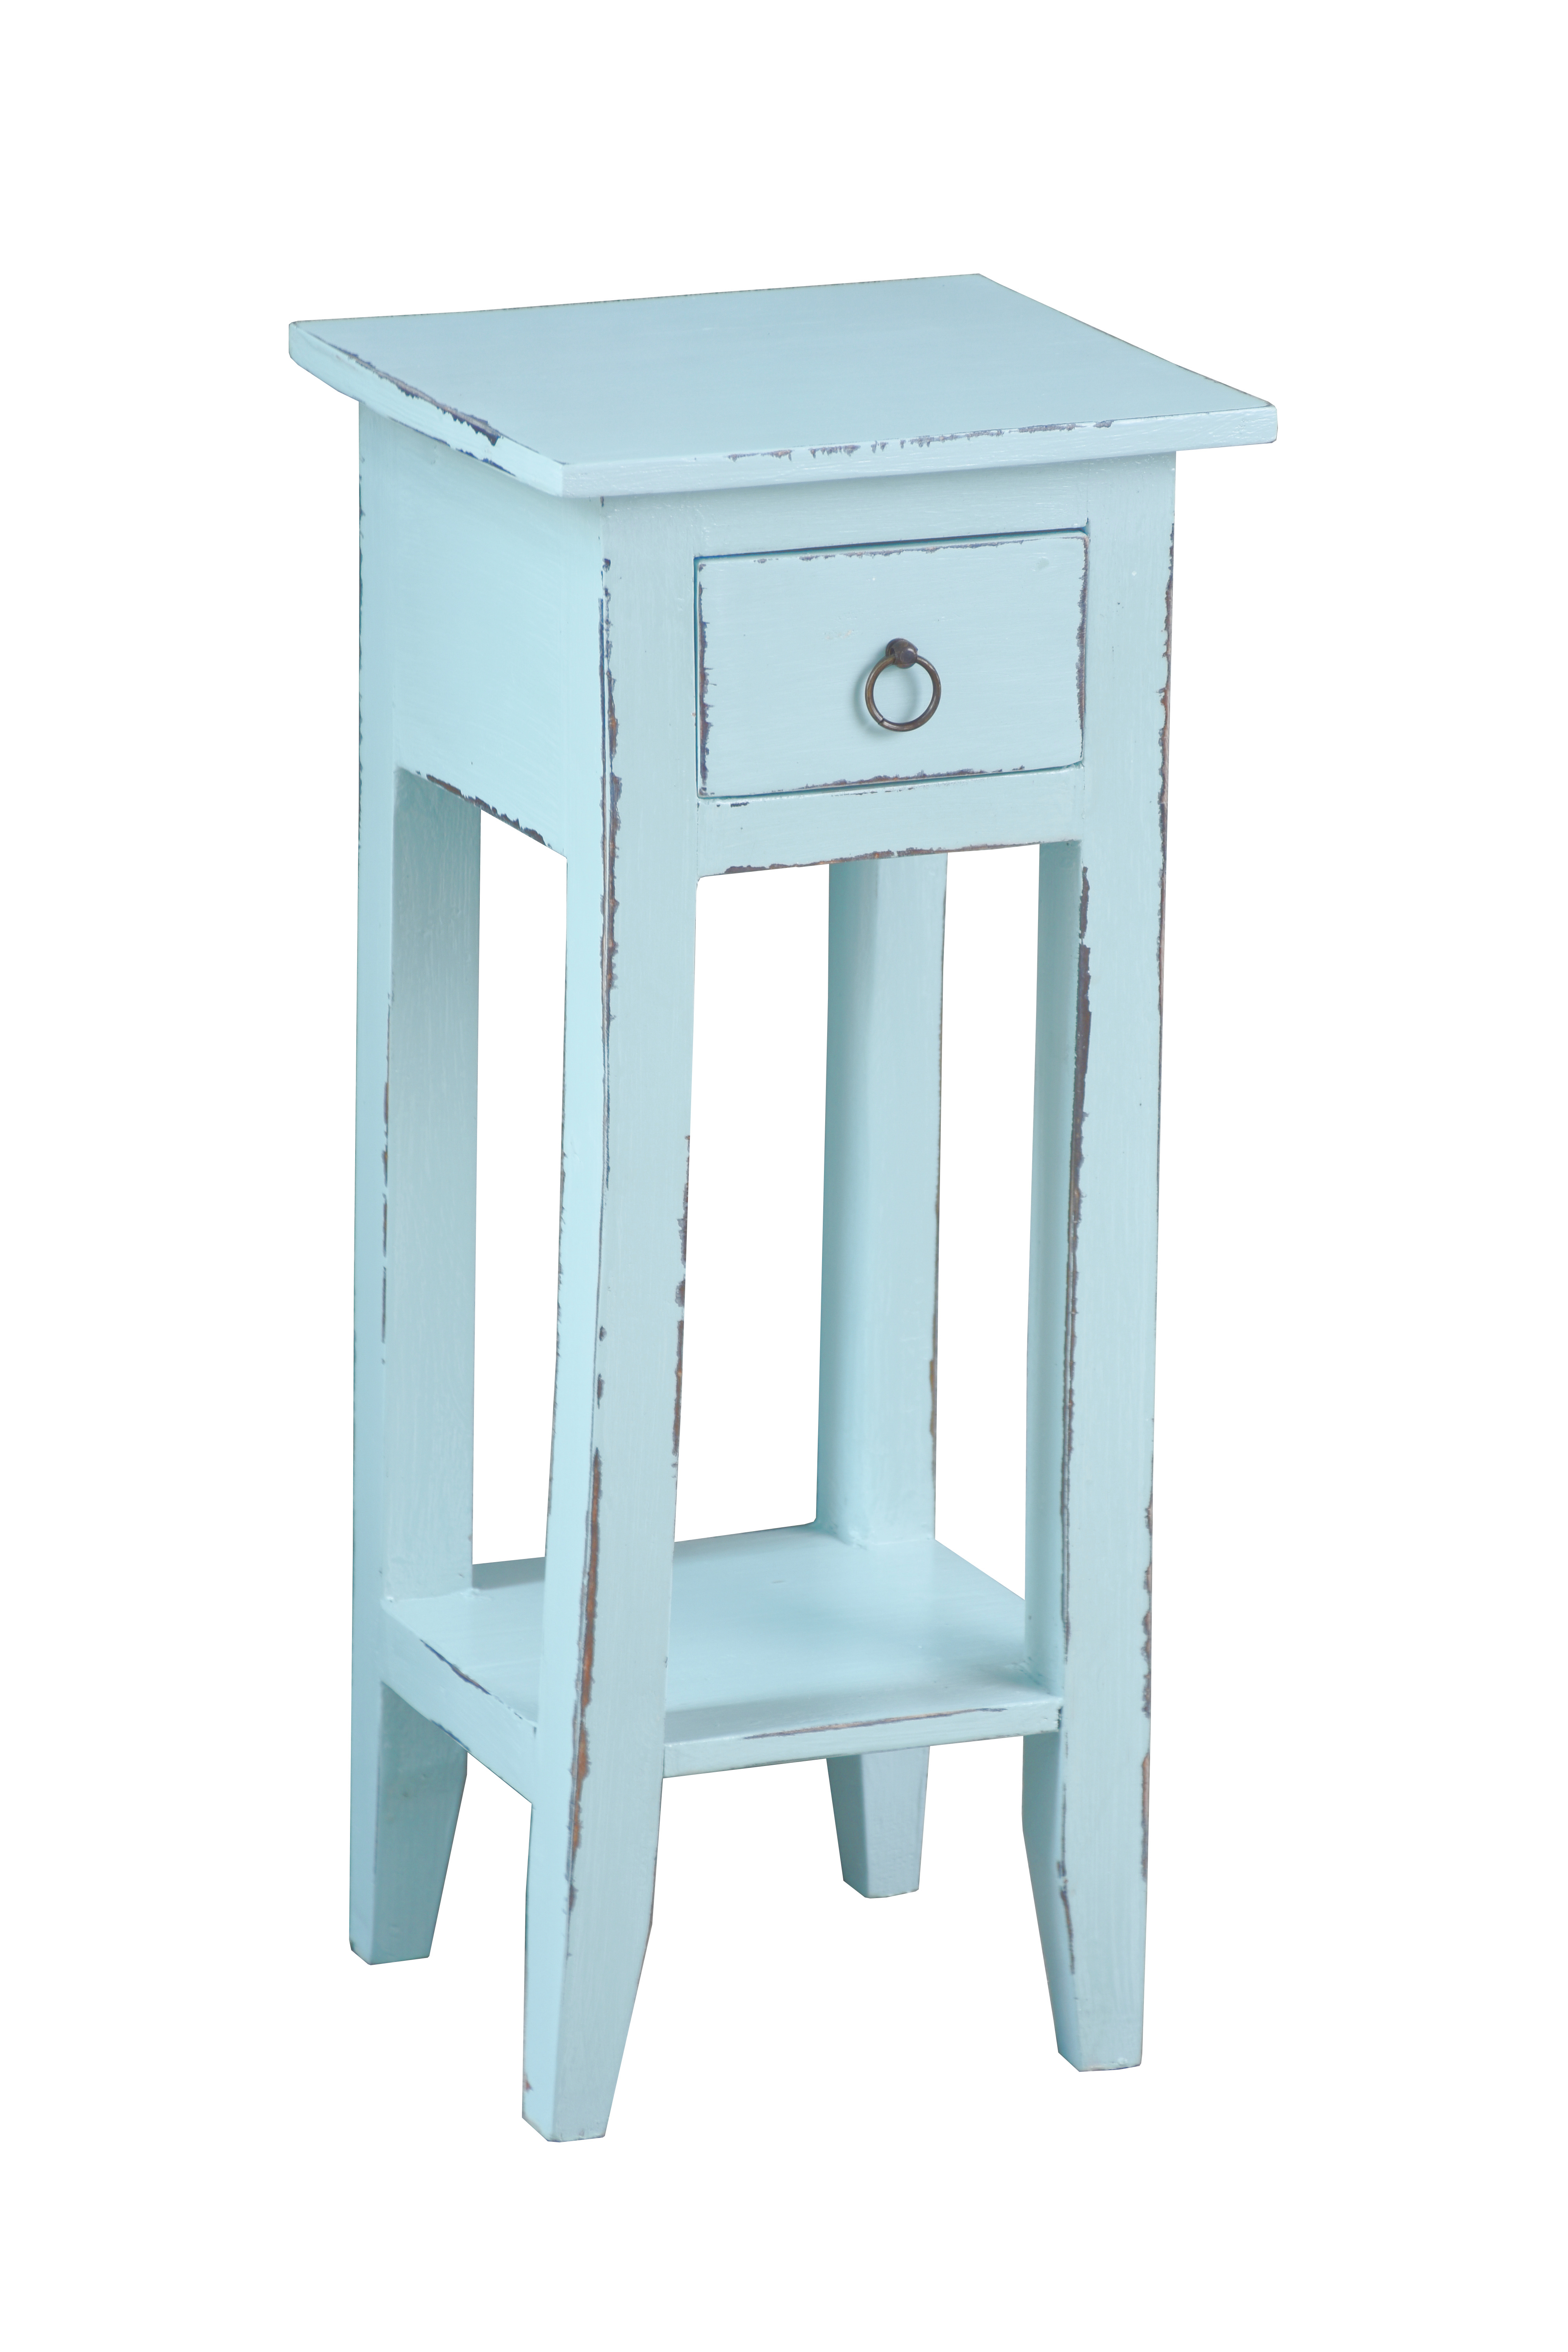 sunset trading cottage accent table sly blue teal white and gold lamp inch high nightstand small mirrored glass console nest tables touch lamps target clear plastic tablecloth bar